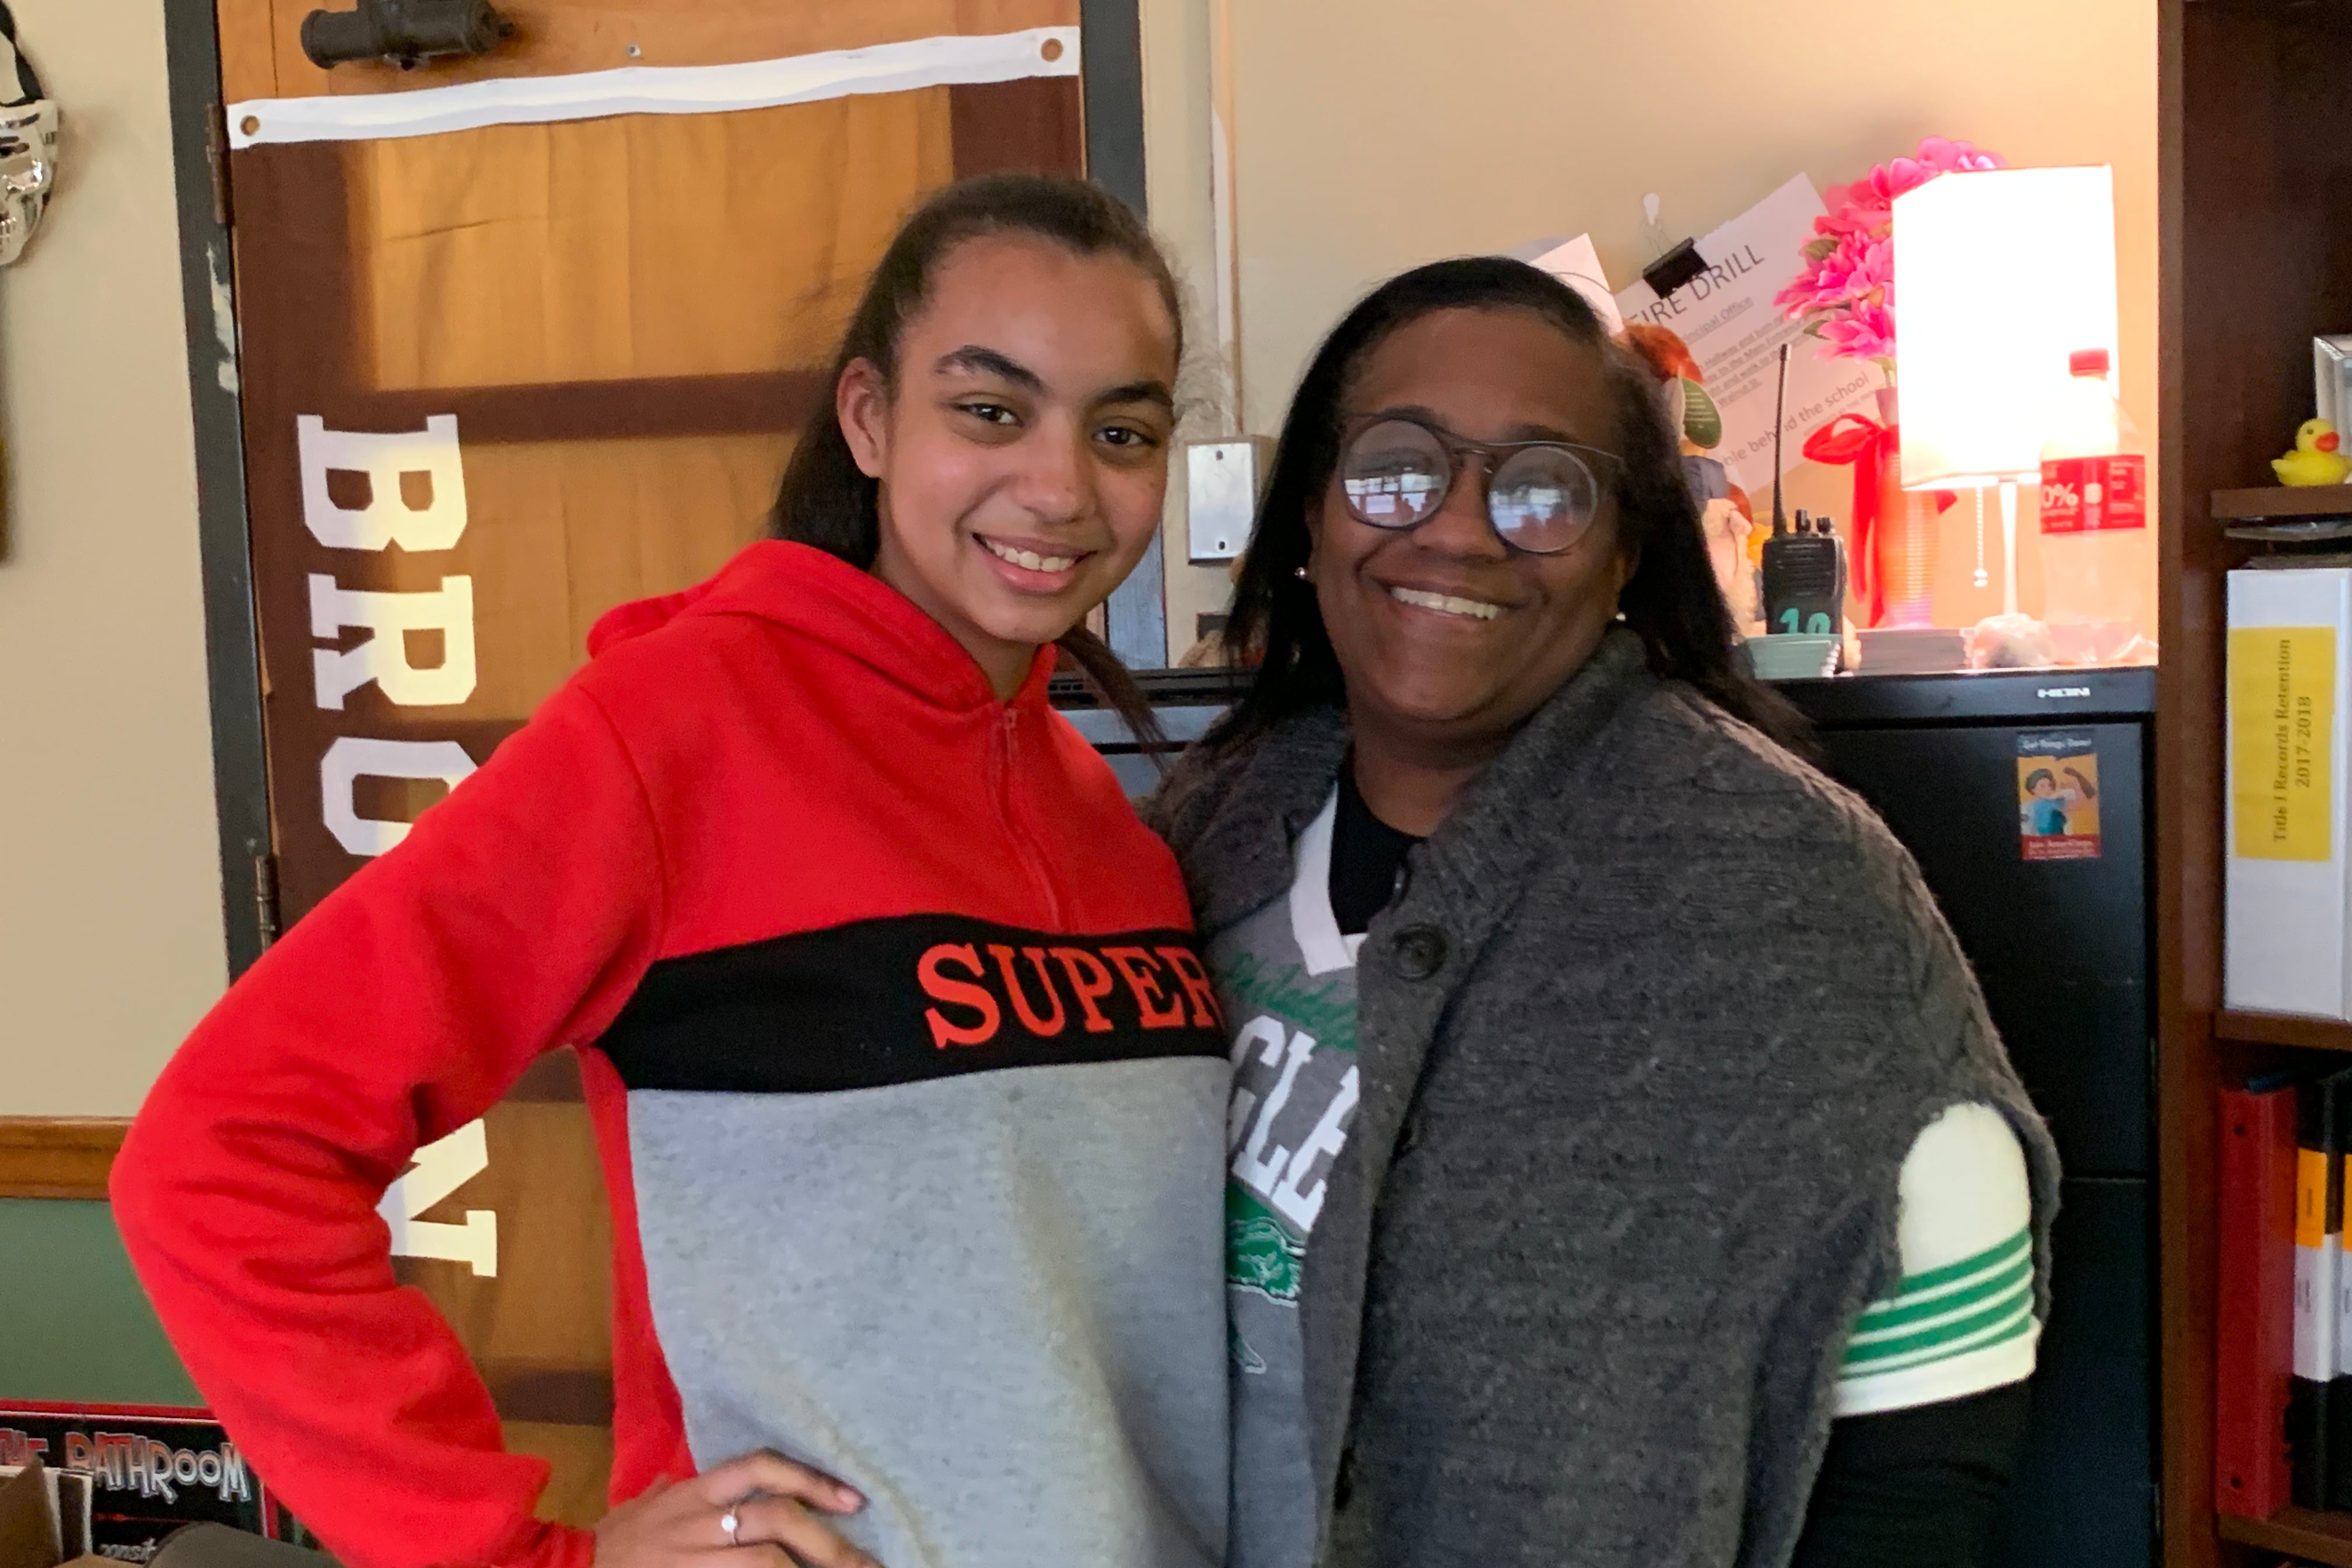 A girl in a shirt that says “Super” stands next to a woman with black hair wearing glasses and a gray sweater over her shoulders. 